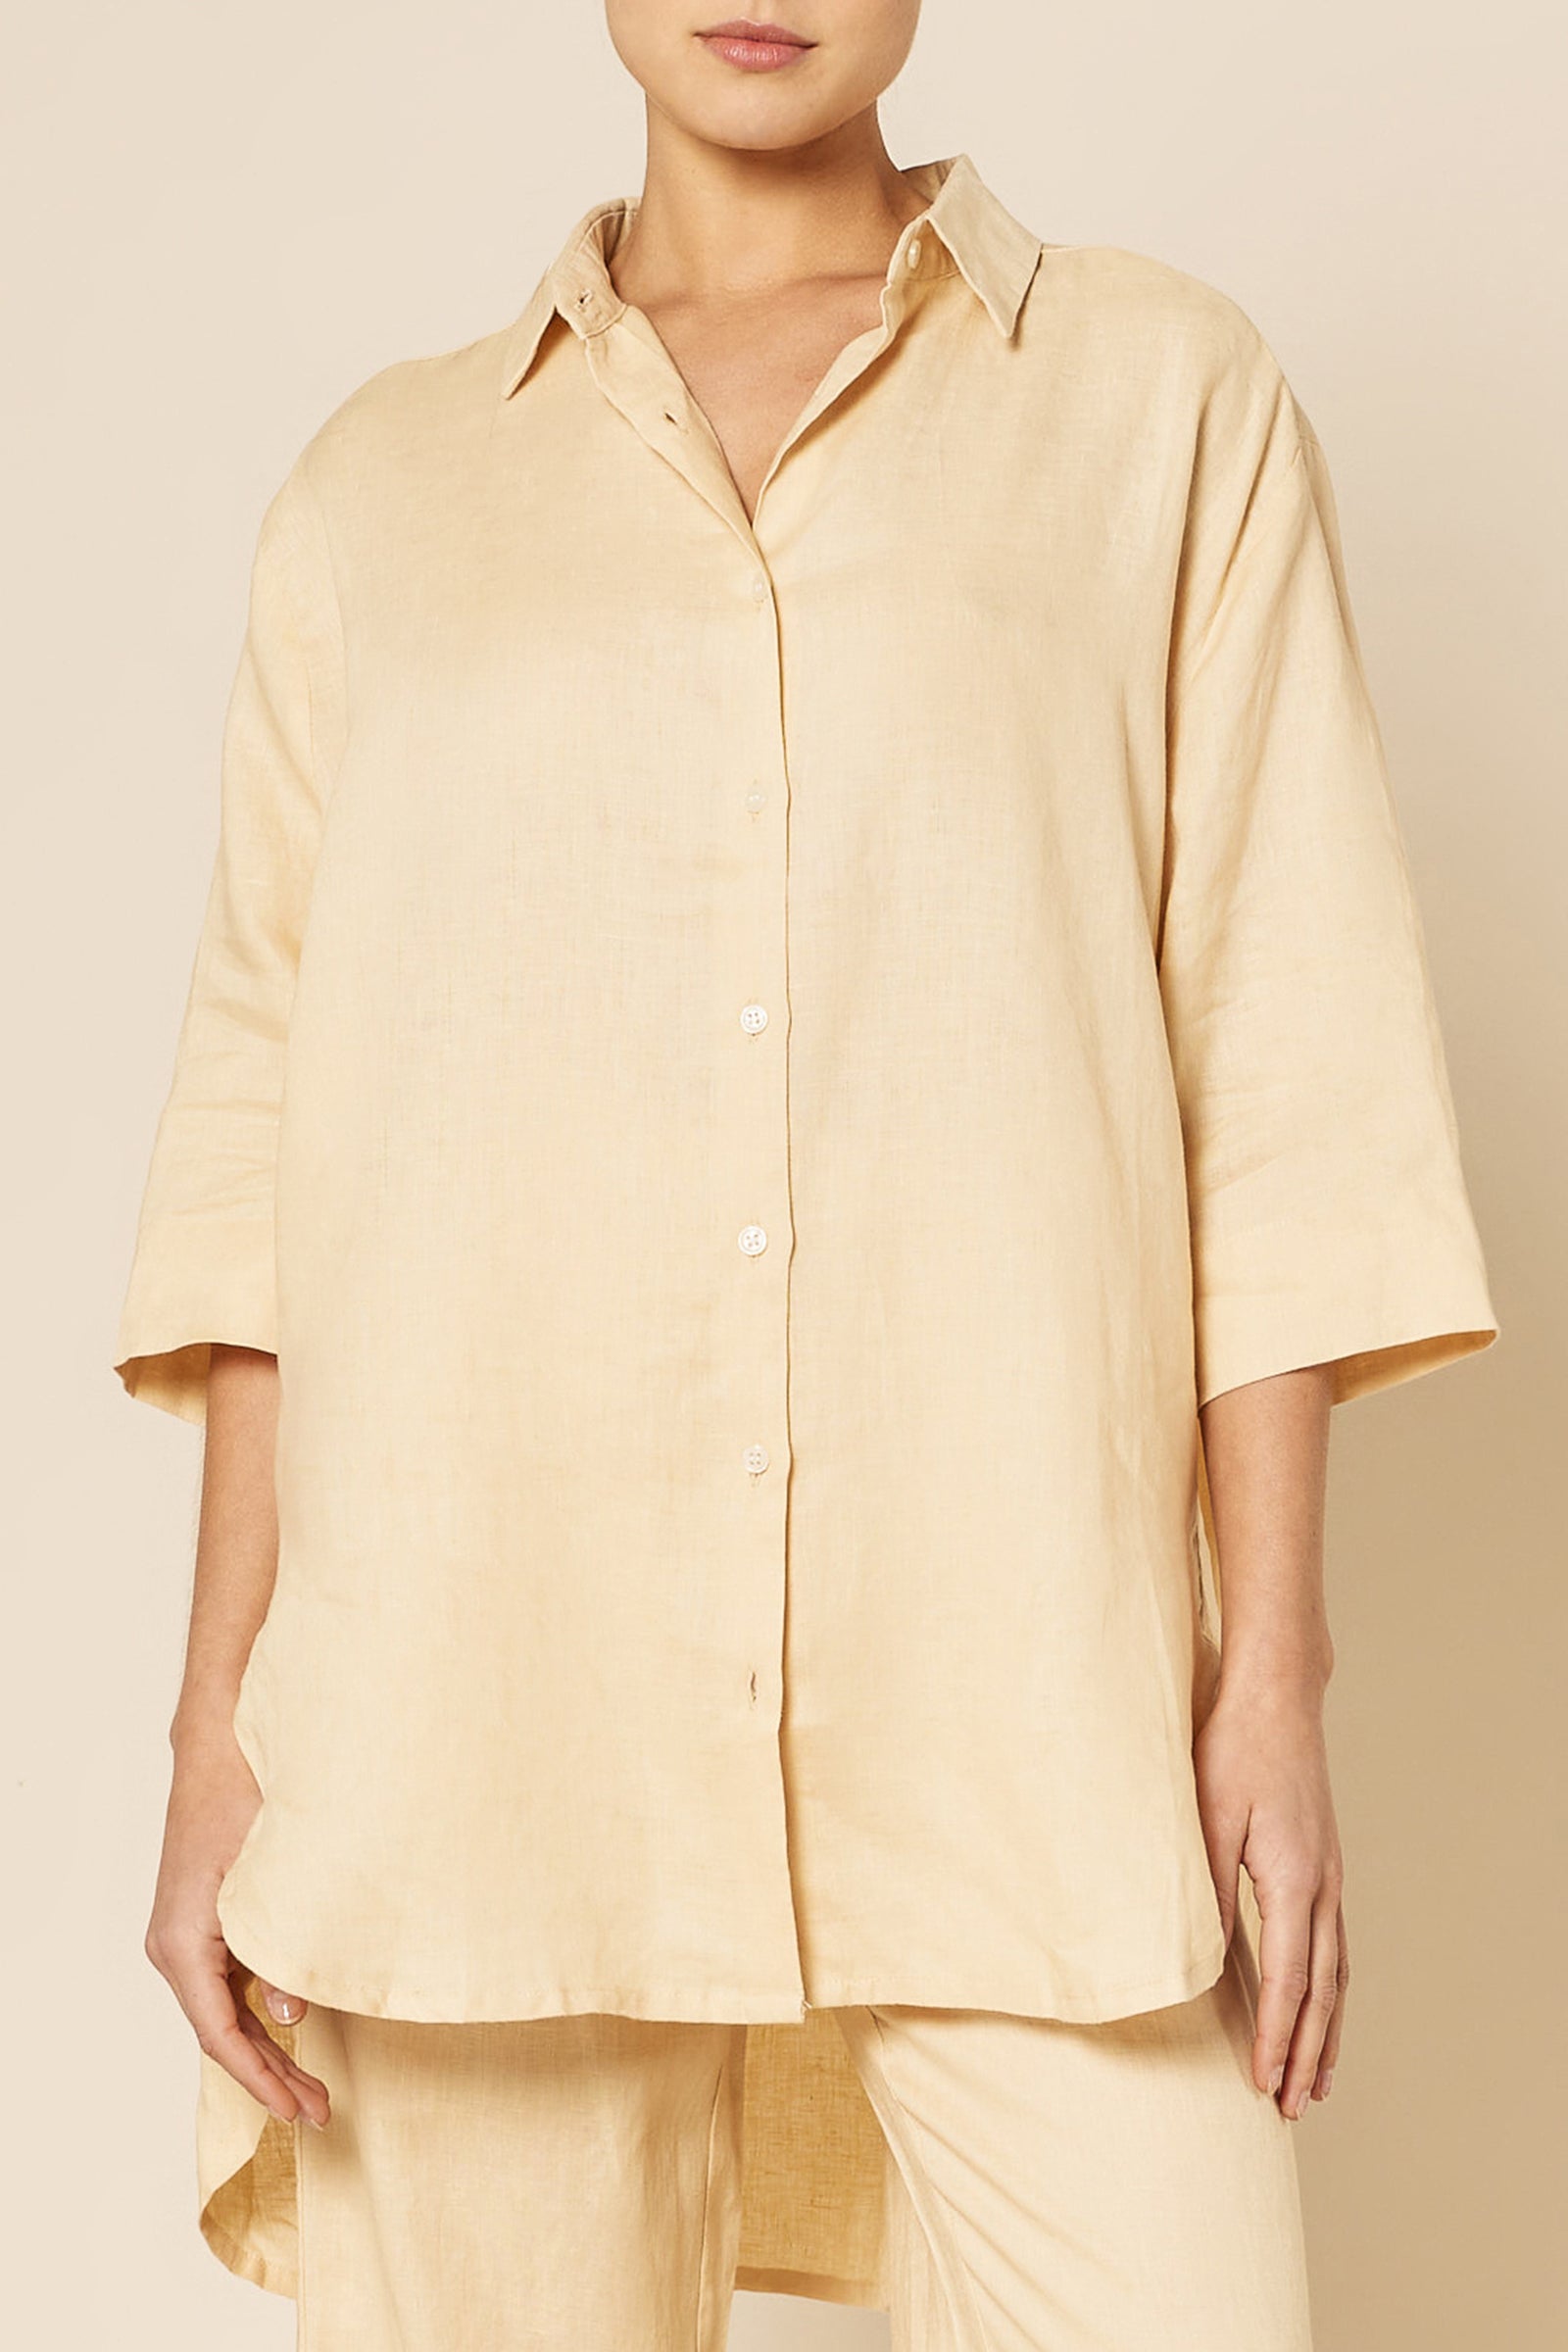 Nude Lucy Lounge Linen Longline Shirt In a Light Brown Butter Colour 